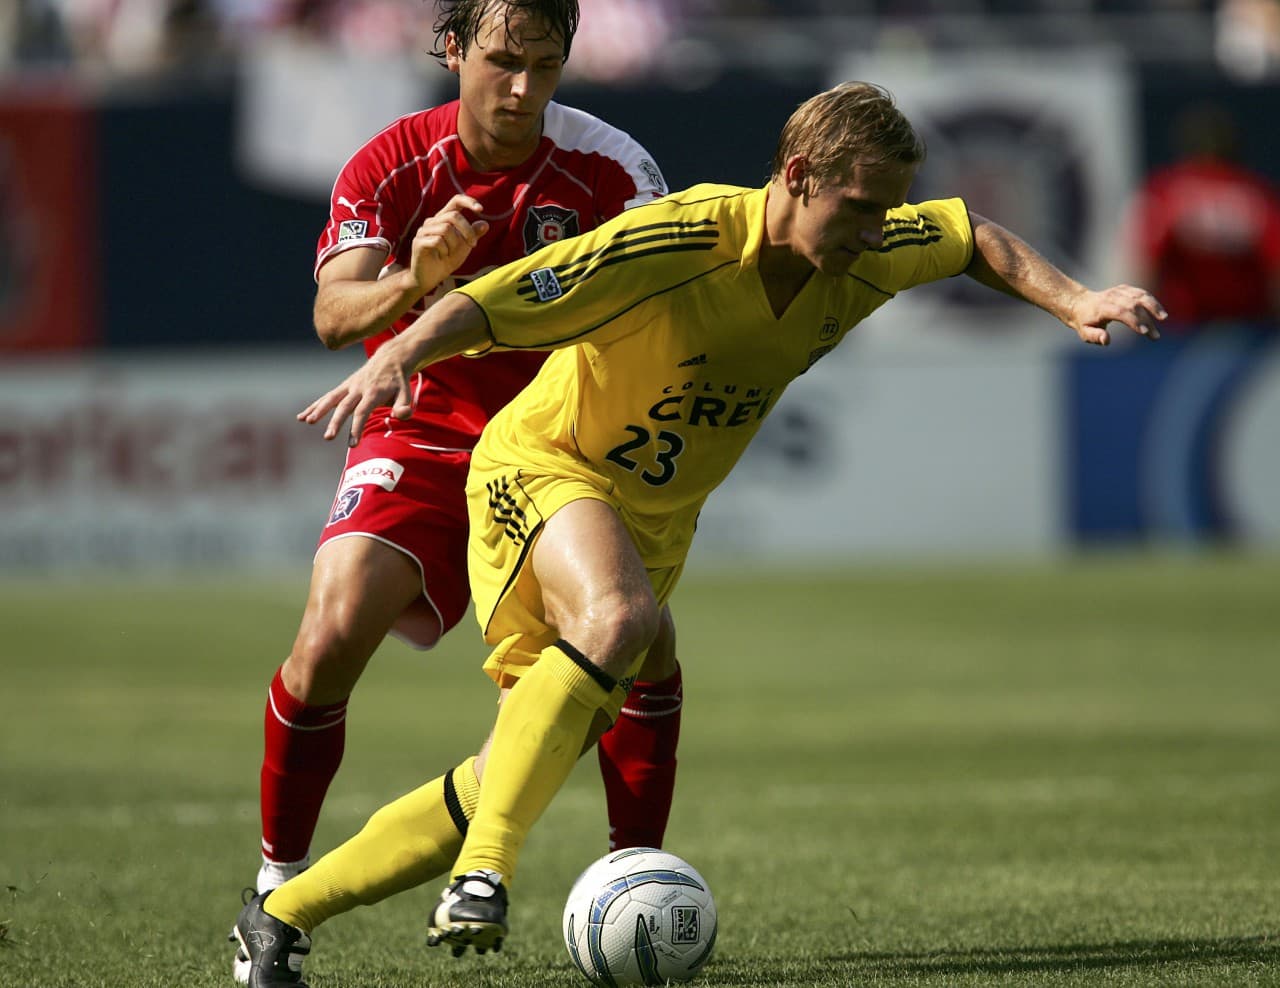 Testo was the first former MLS player to come out. (Jonathan Daniel/ Getty Images)